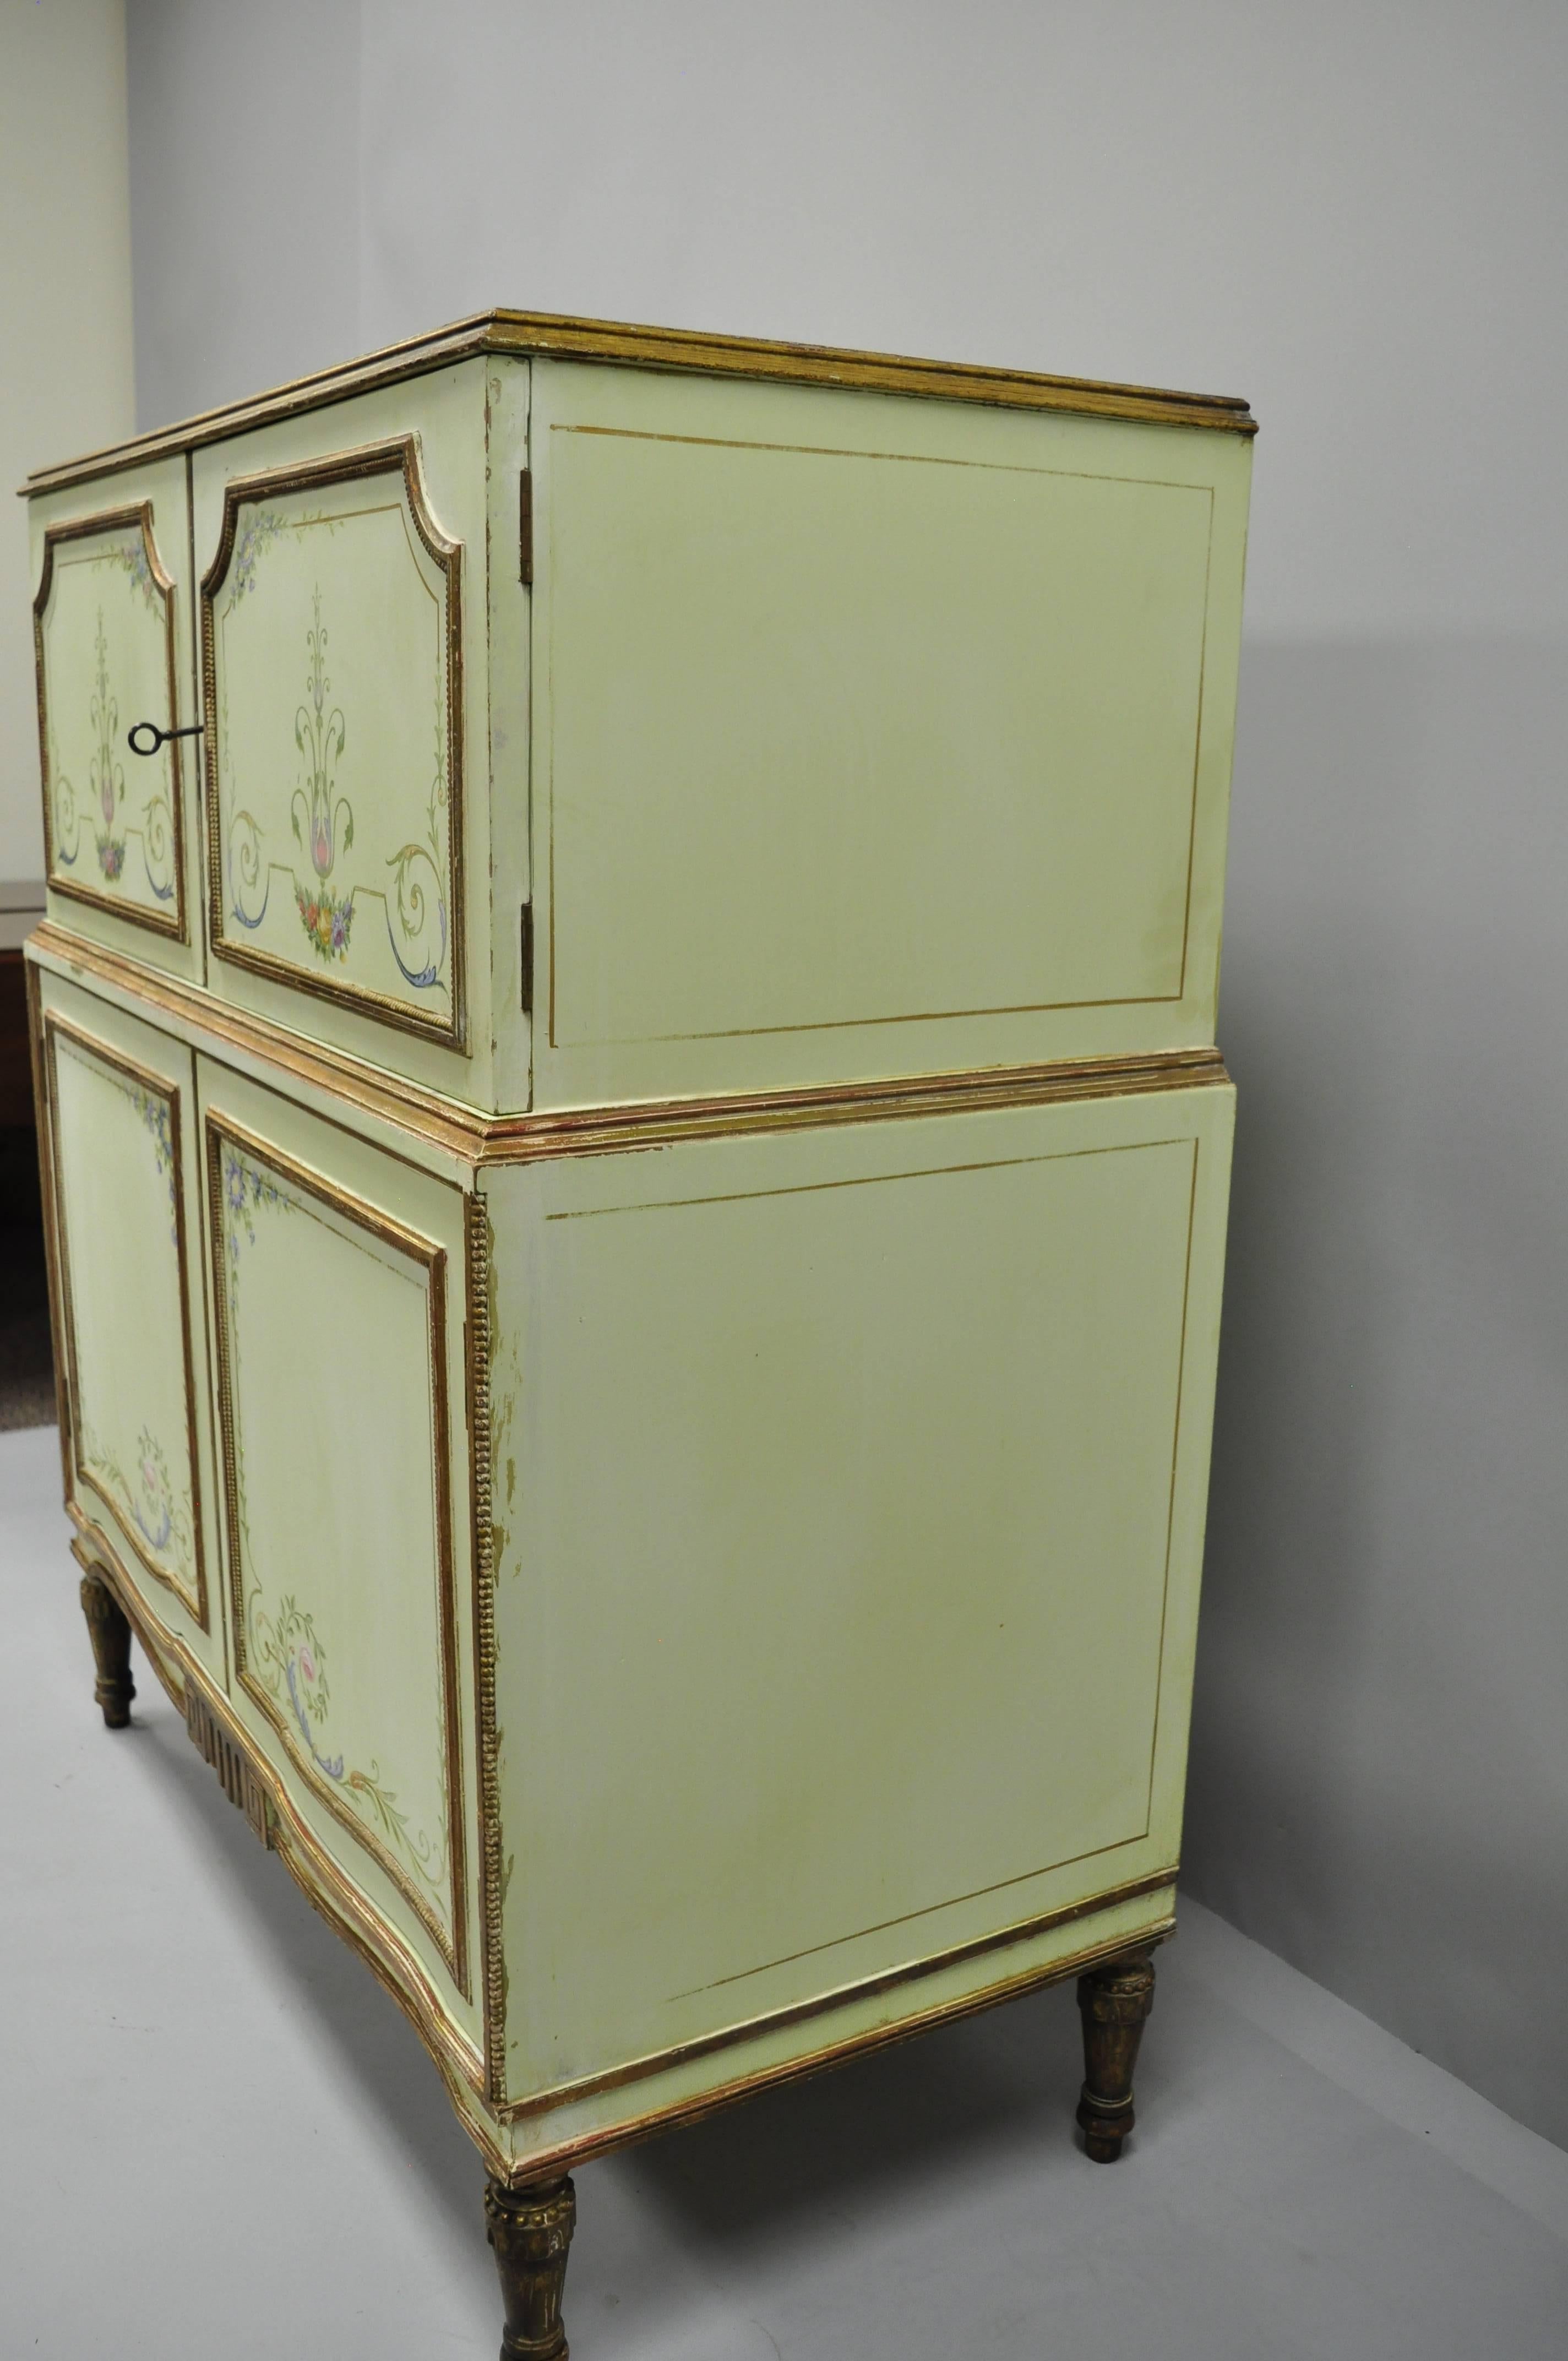 Antique Adams Style Green Painted Chest of Drawers Dresser by New York Galleries 2